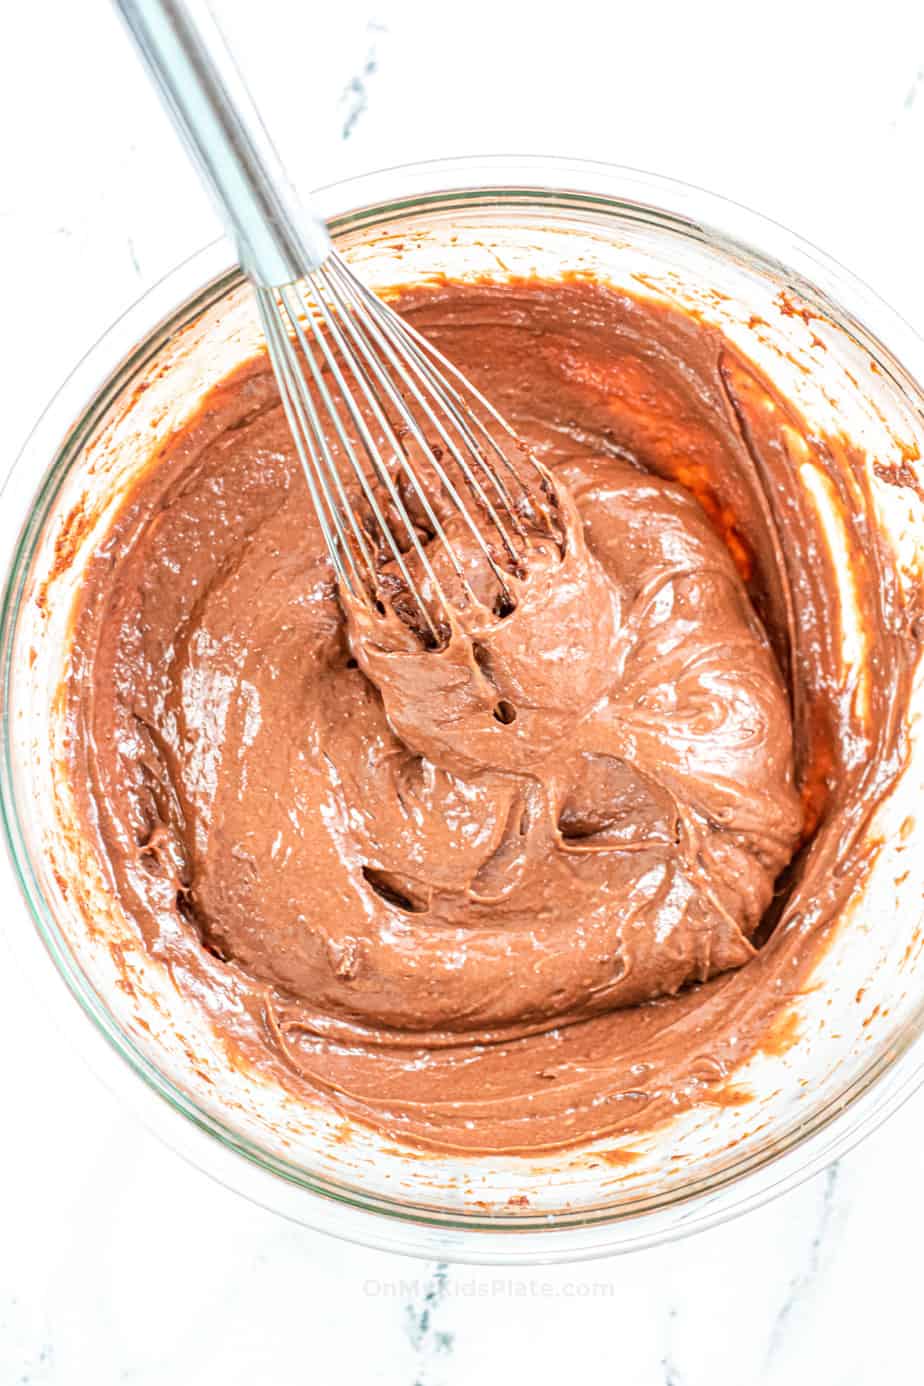 Mixing chocolate pudding in a bowl with a whisk.